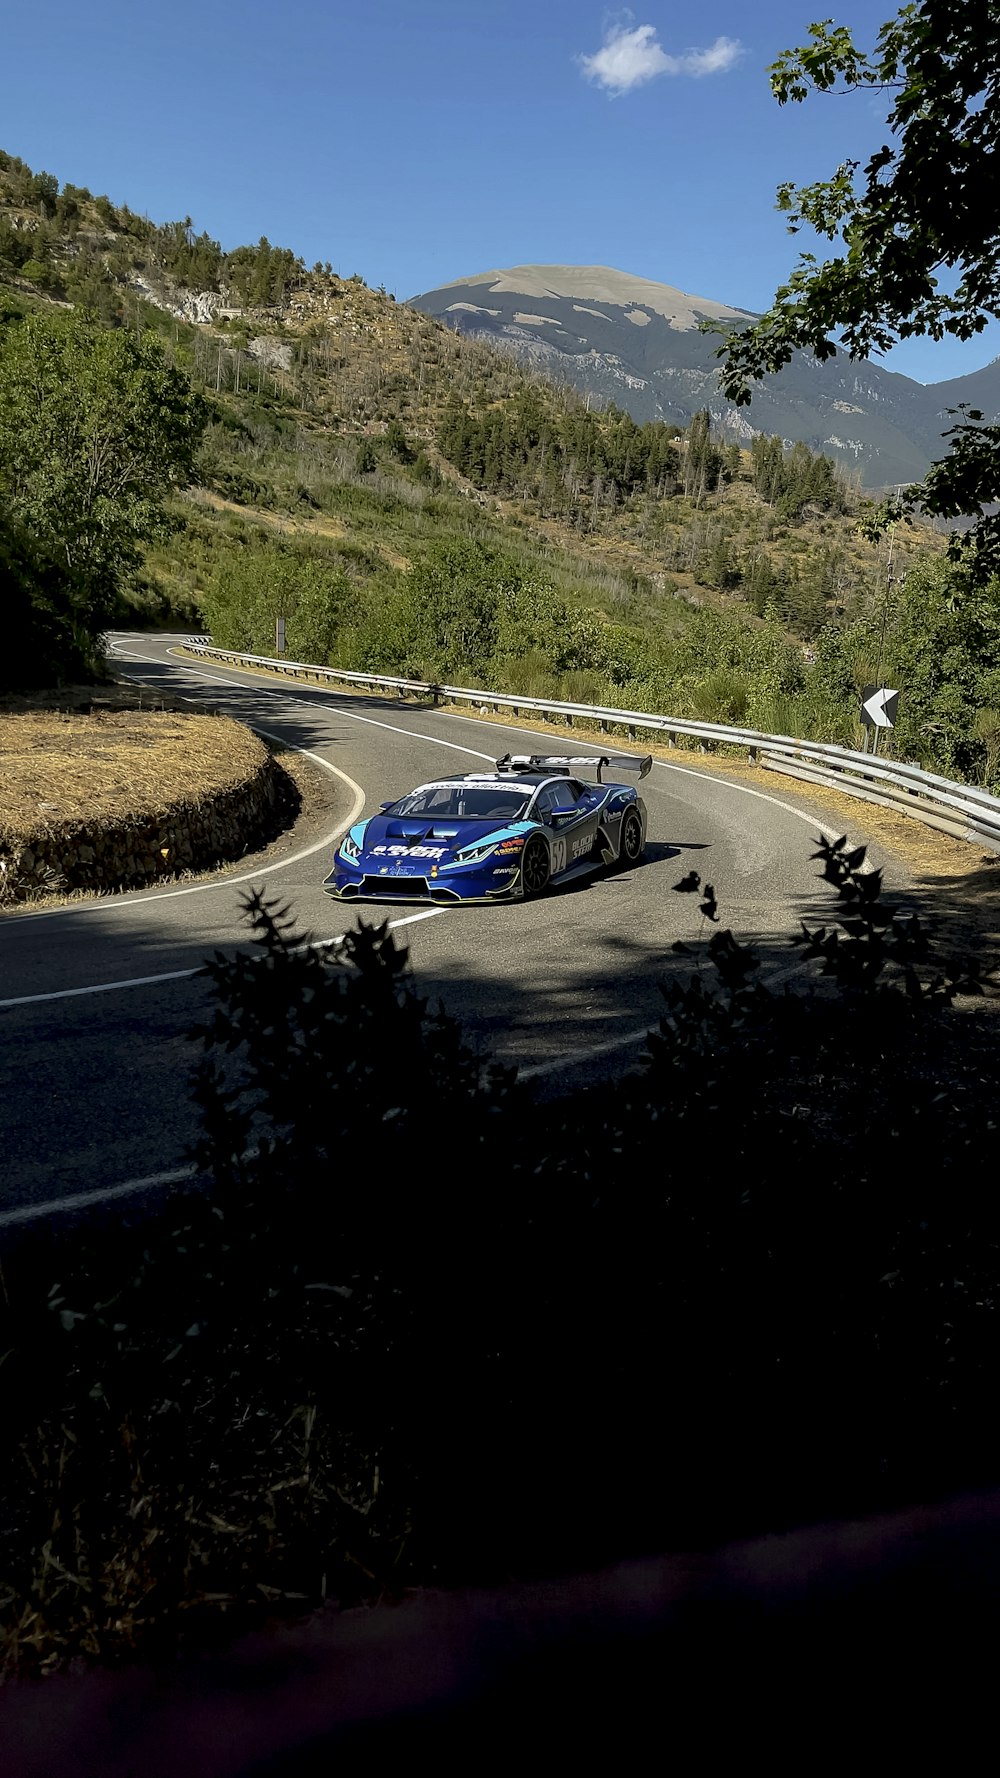 blue and white racing car on track during daytime